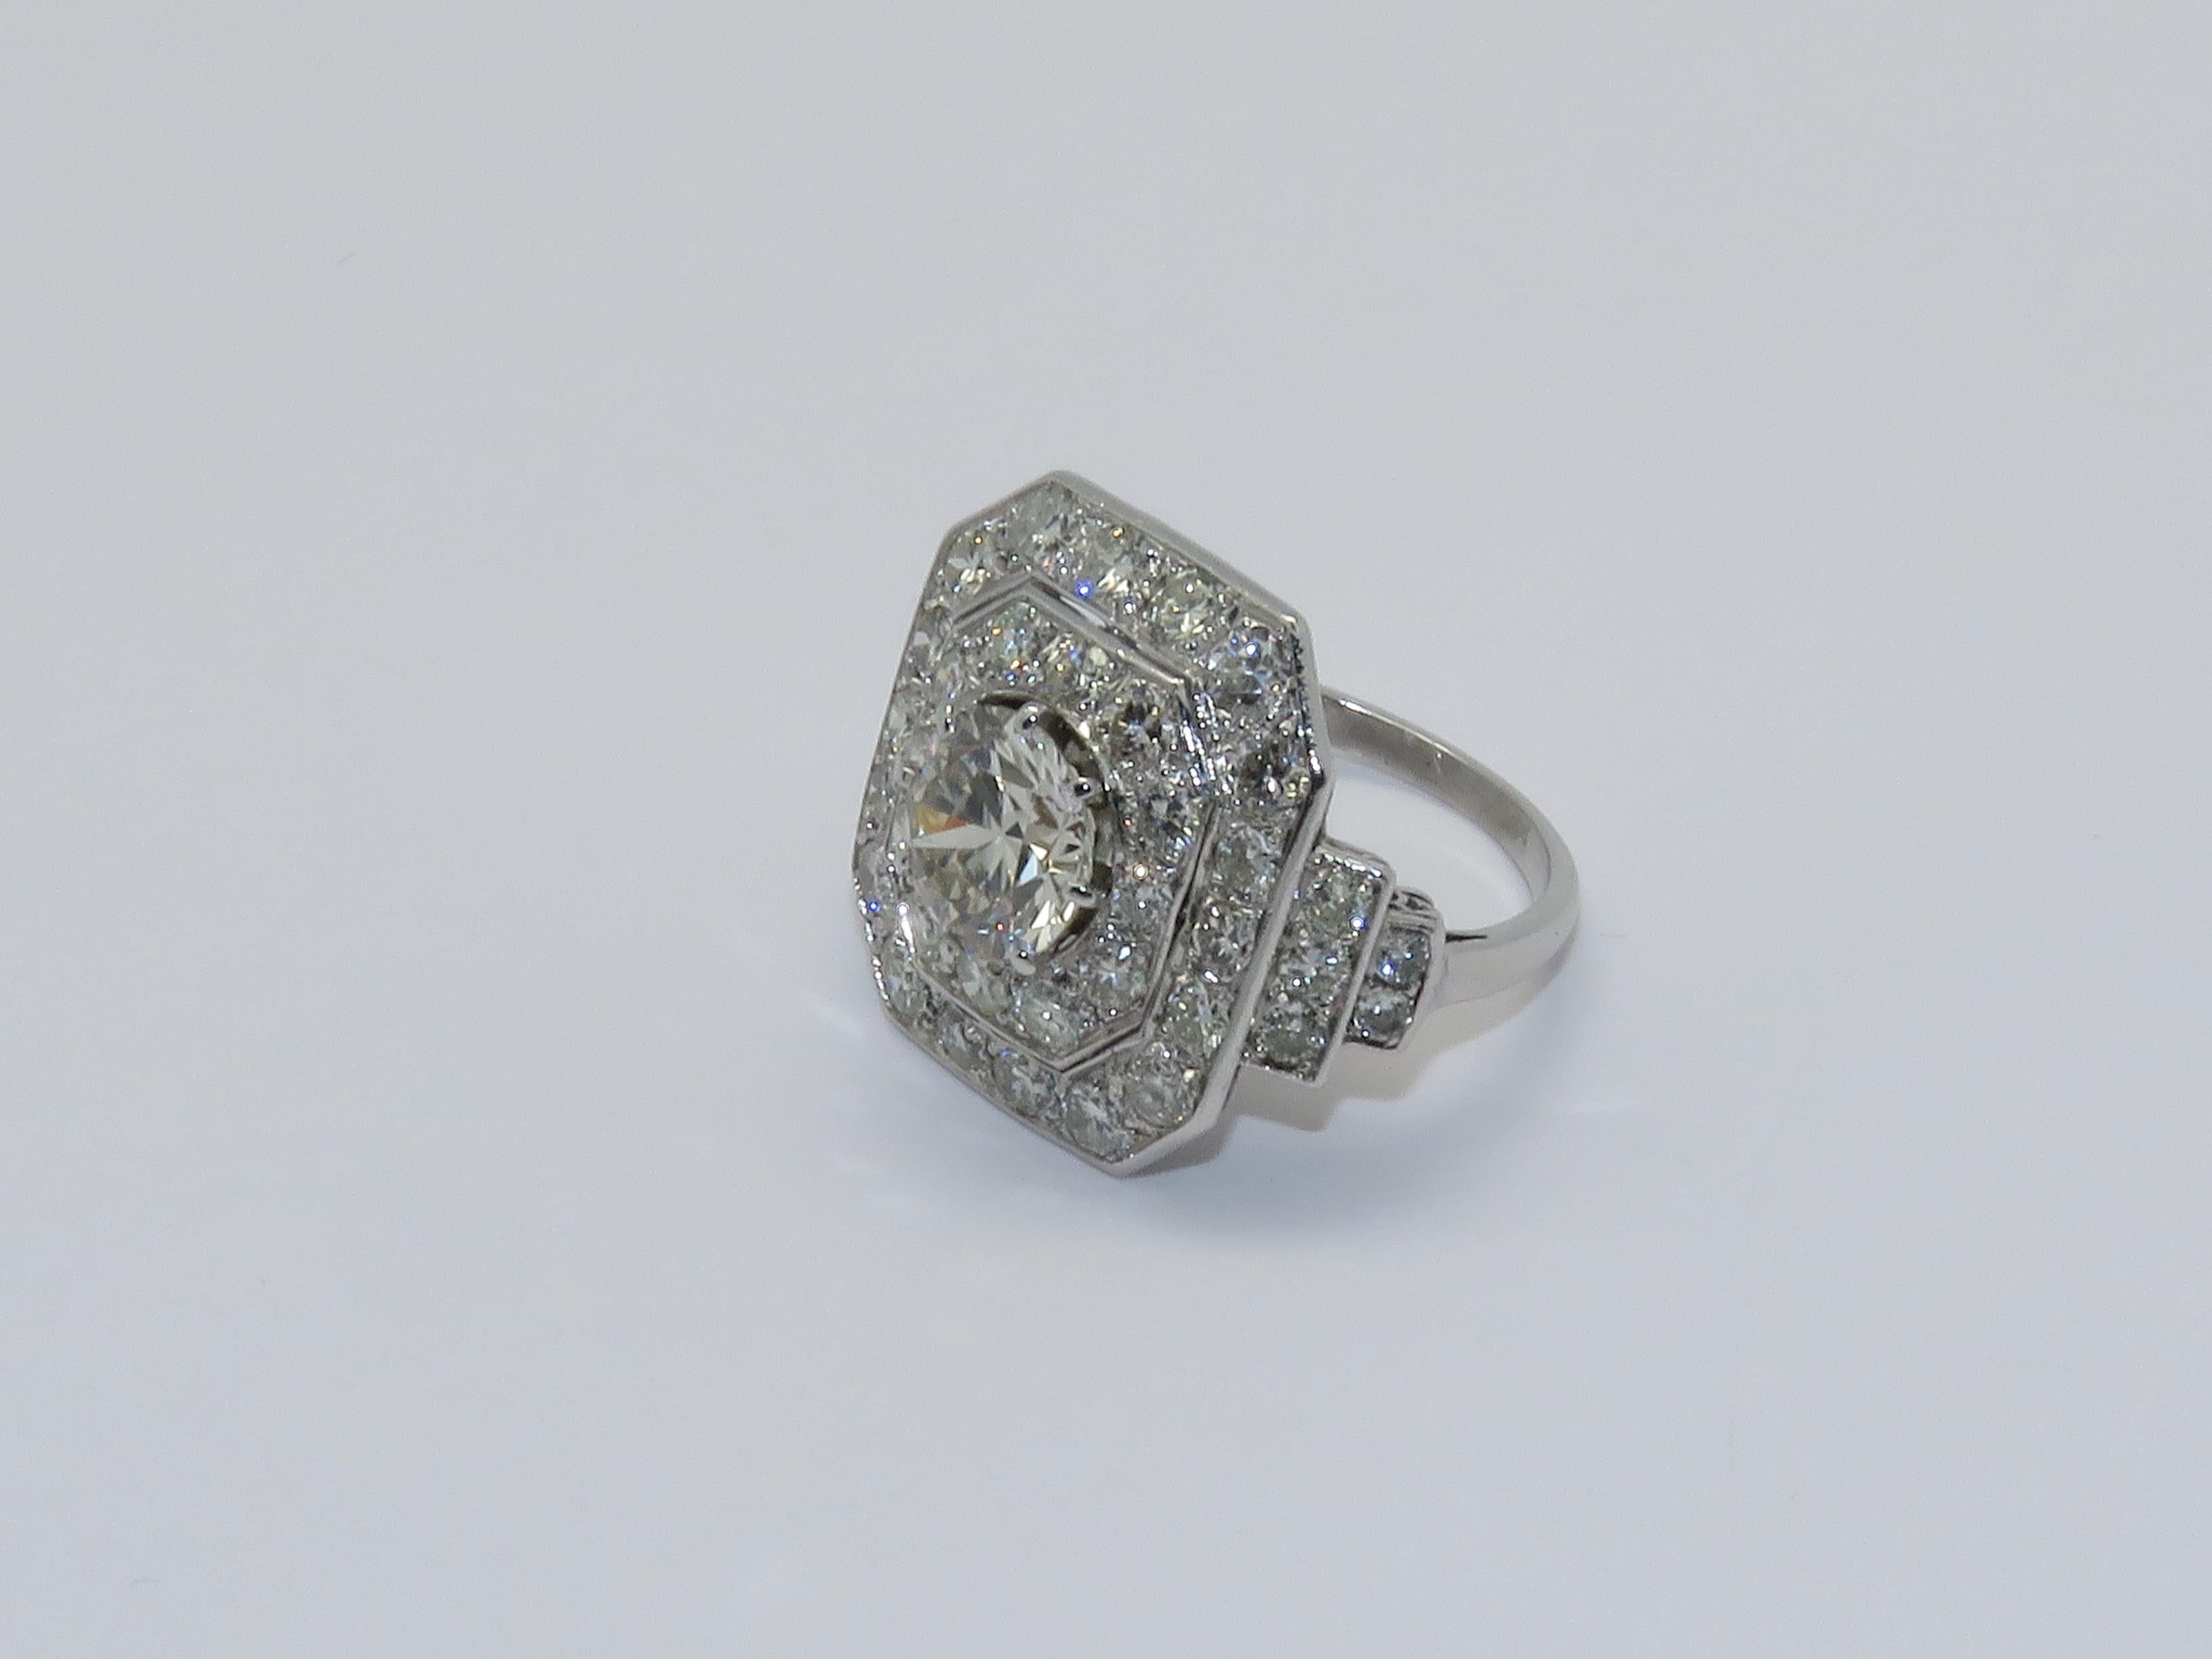 The central diamond weight 2 ct approximately and the total weight of the diamonds is 2.50 ct.

The ring size is 53    6 1/4 US

Measurements:
Height: 0.98 in ( 2.50 cm )     Lenght: 0.87 in ( 2.20 cm )      Width: 0.79 in ( 2 cm )      Weight: 7.78